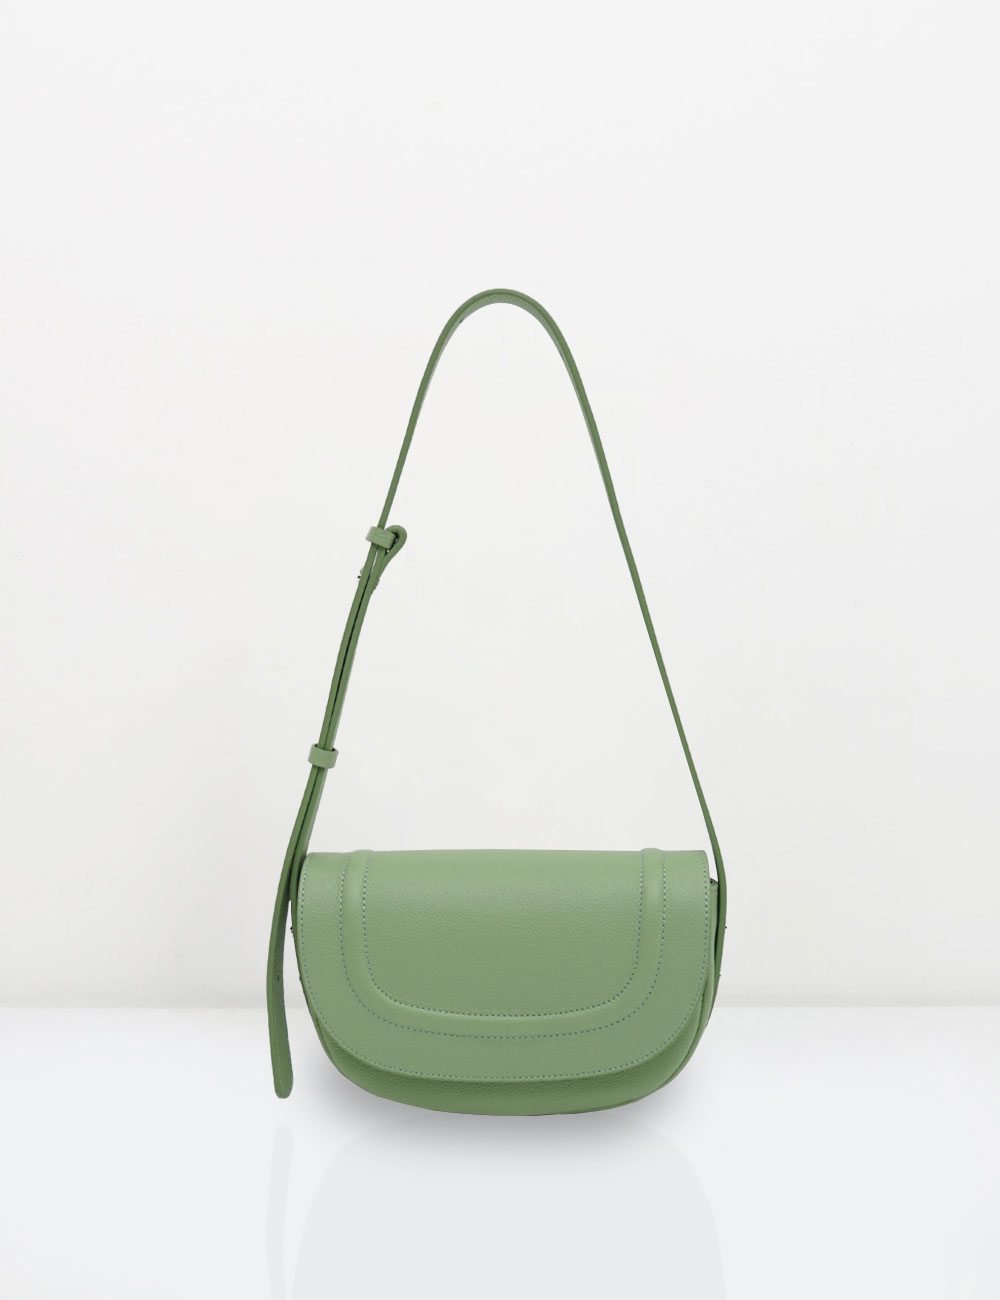 LONI small embo / apple green (sold out)